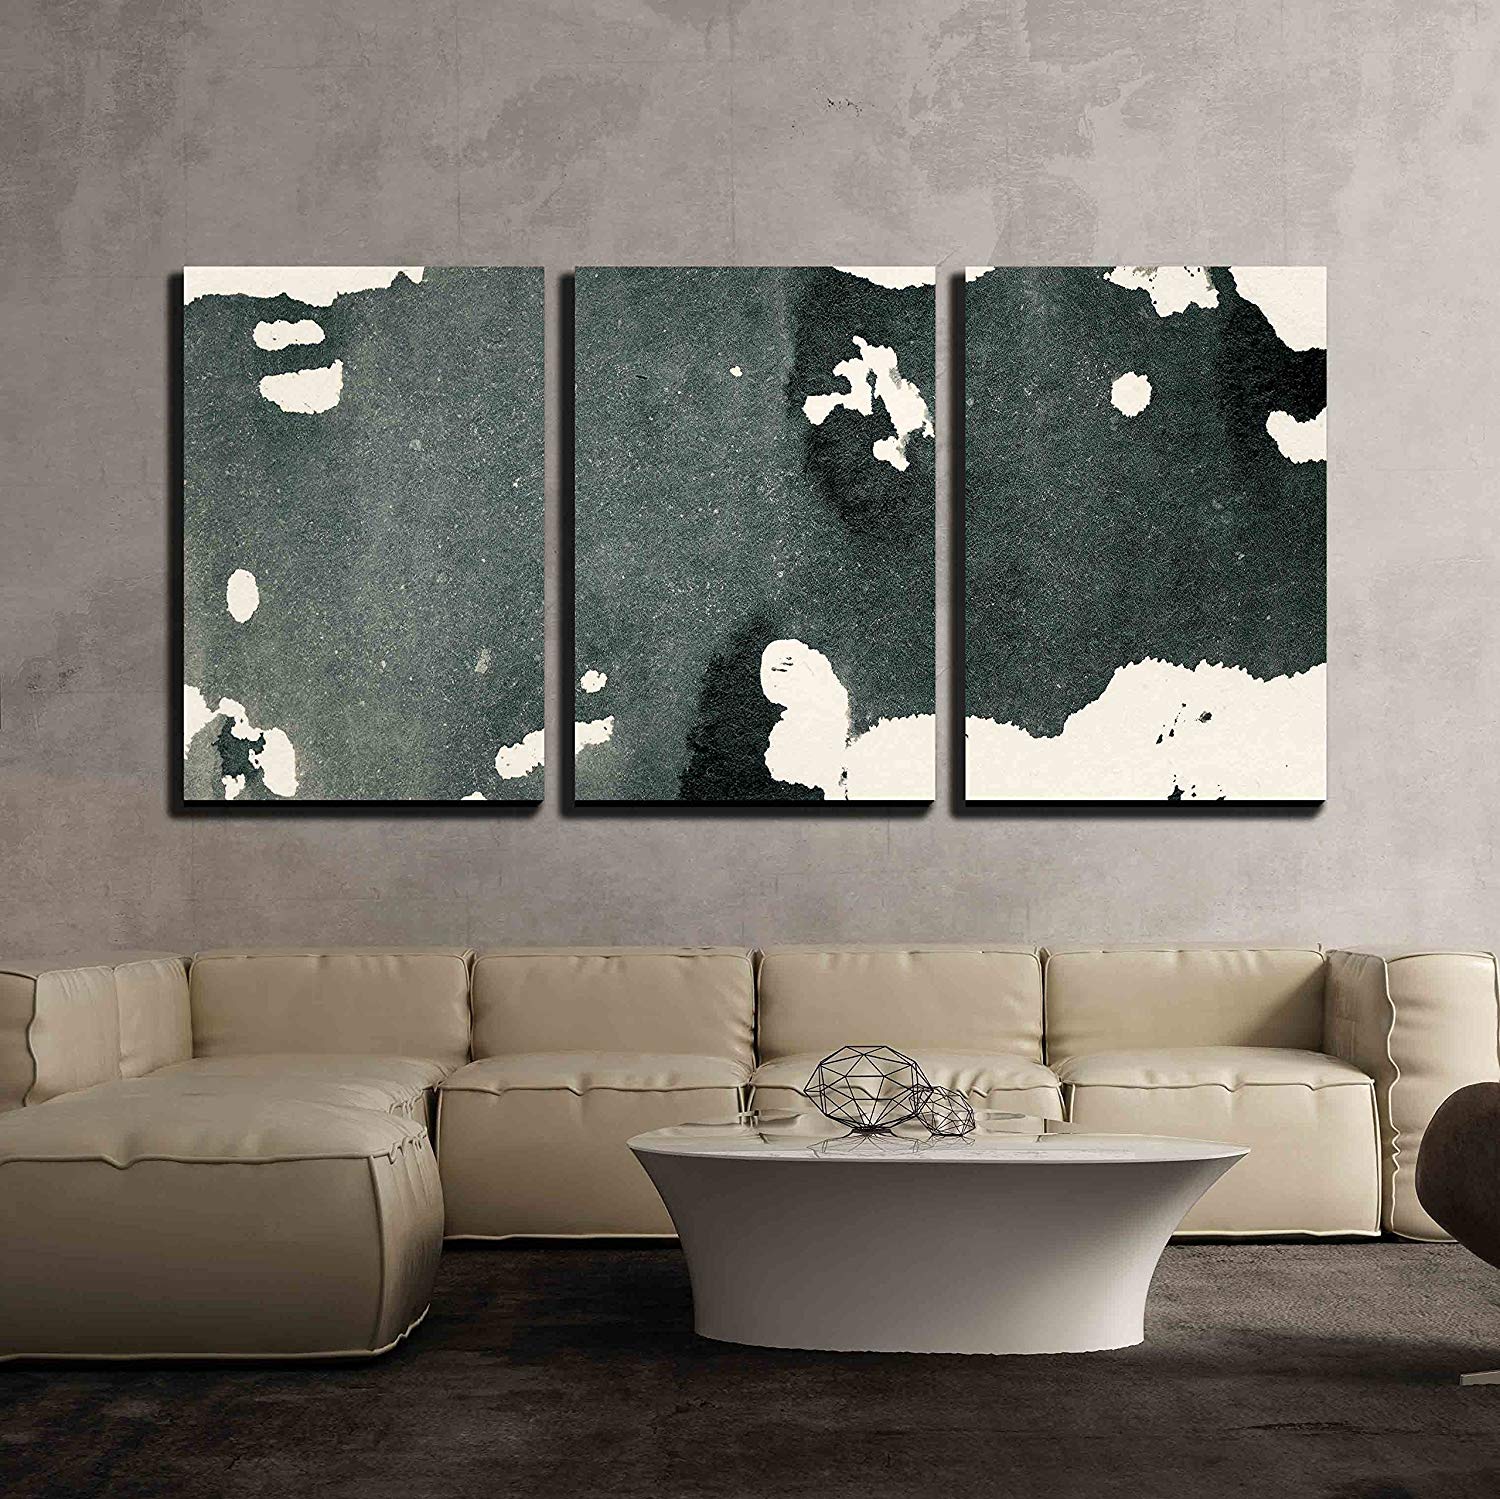 Abstract Painted Grunge Background Ink Texture x3 Panels - Canvas ...